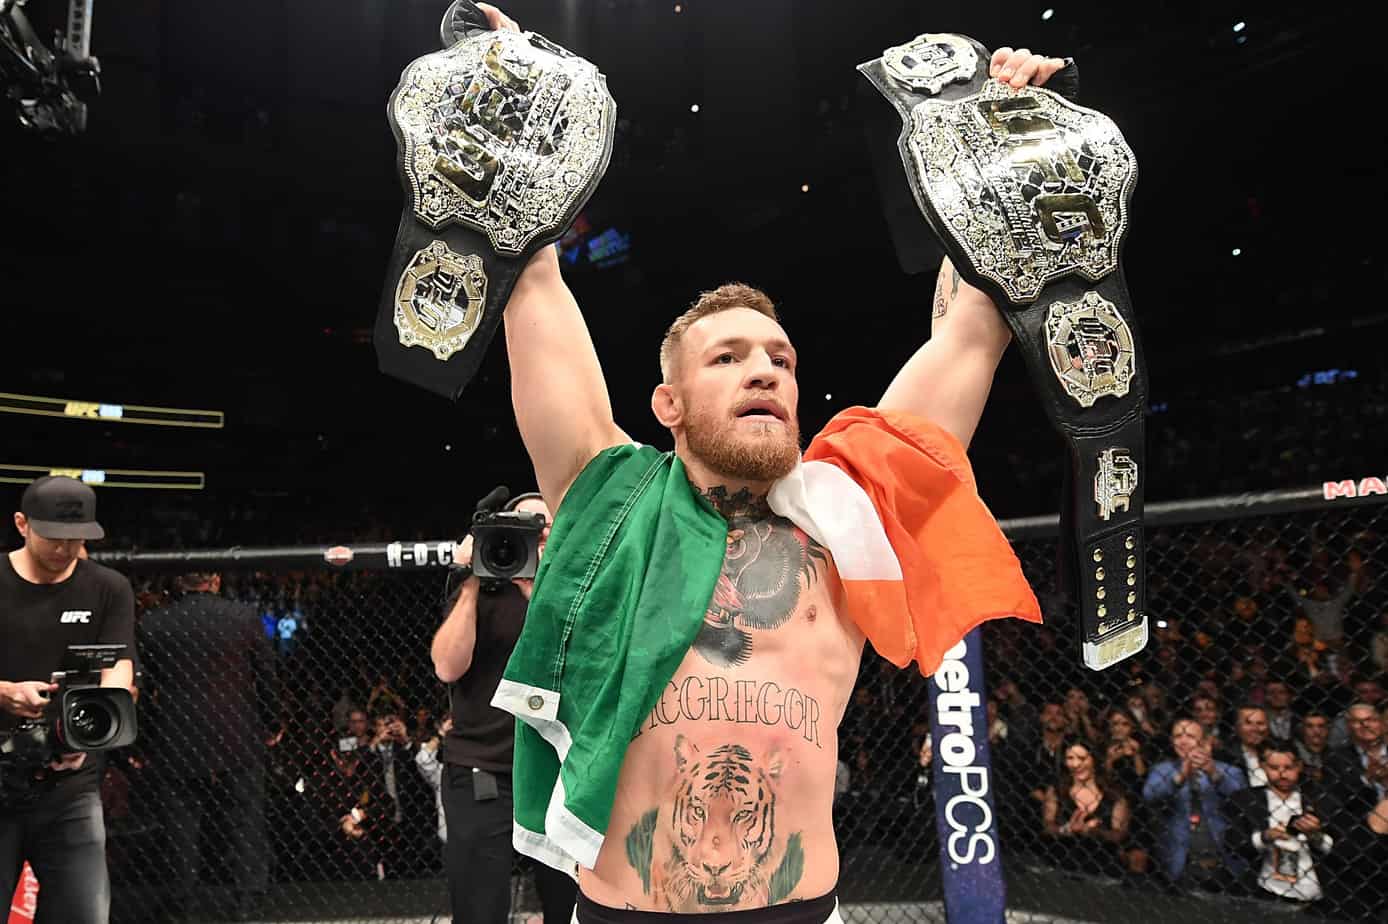 McGregor becoming the two division champion